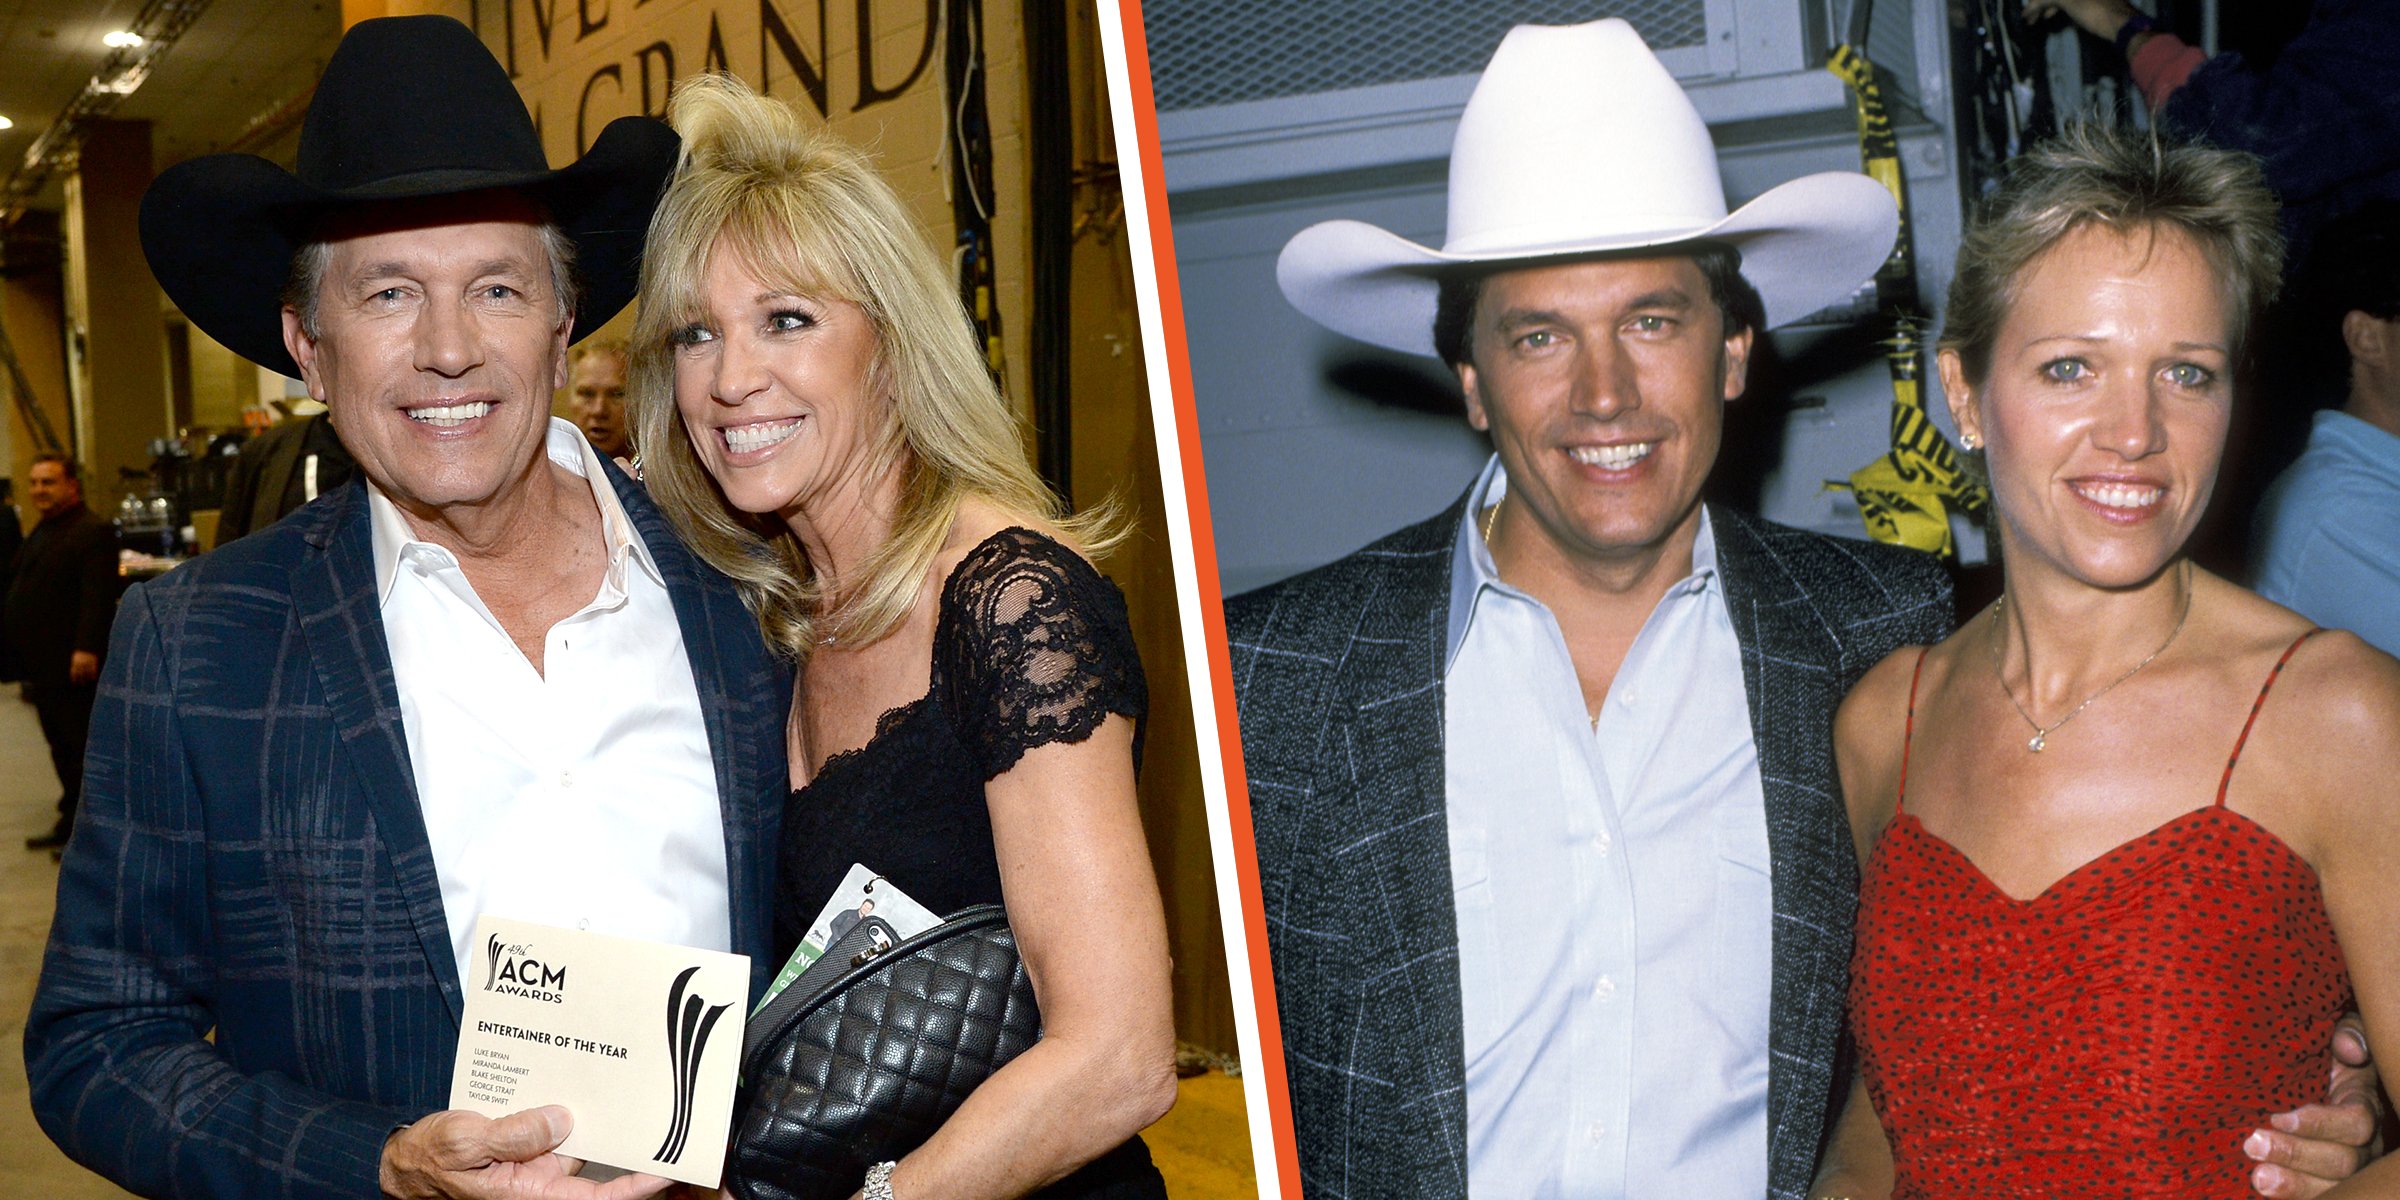 George Strait and his wife, Norma | Source: Getty images